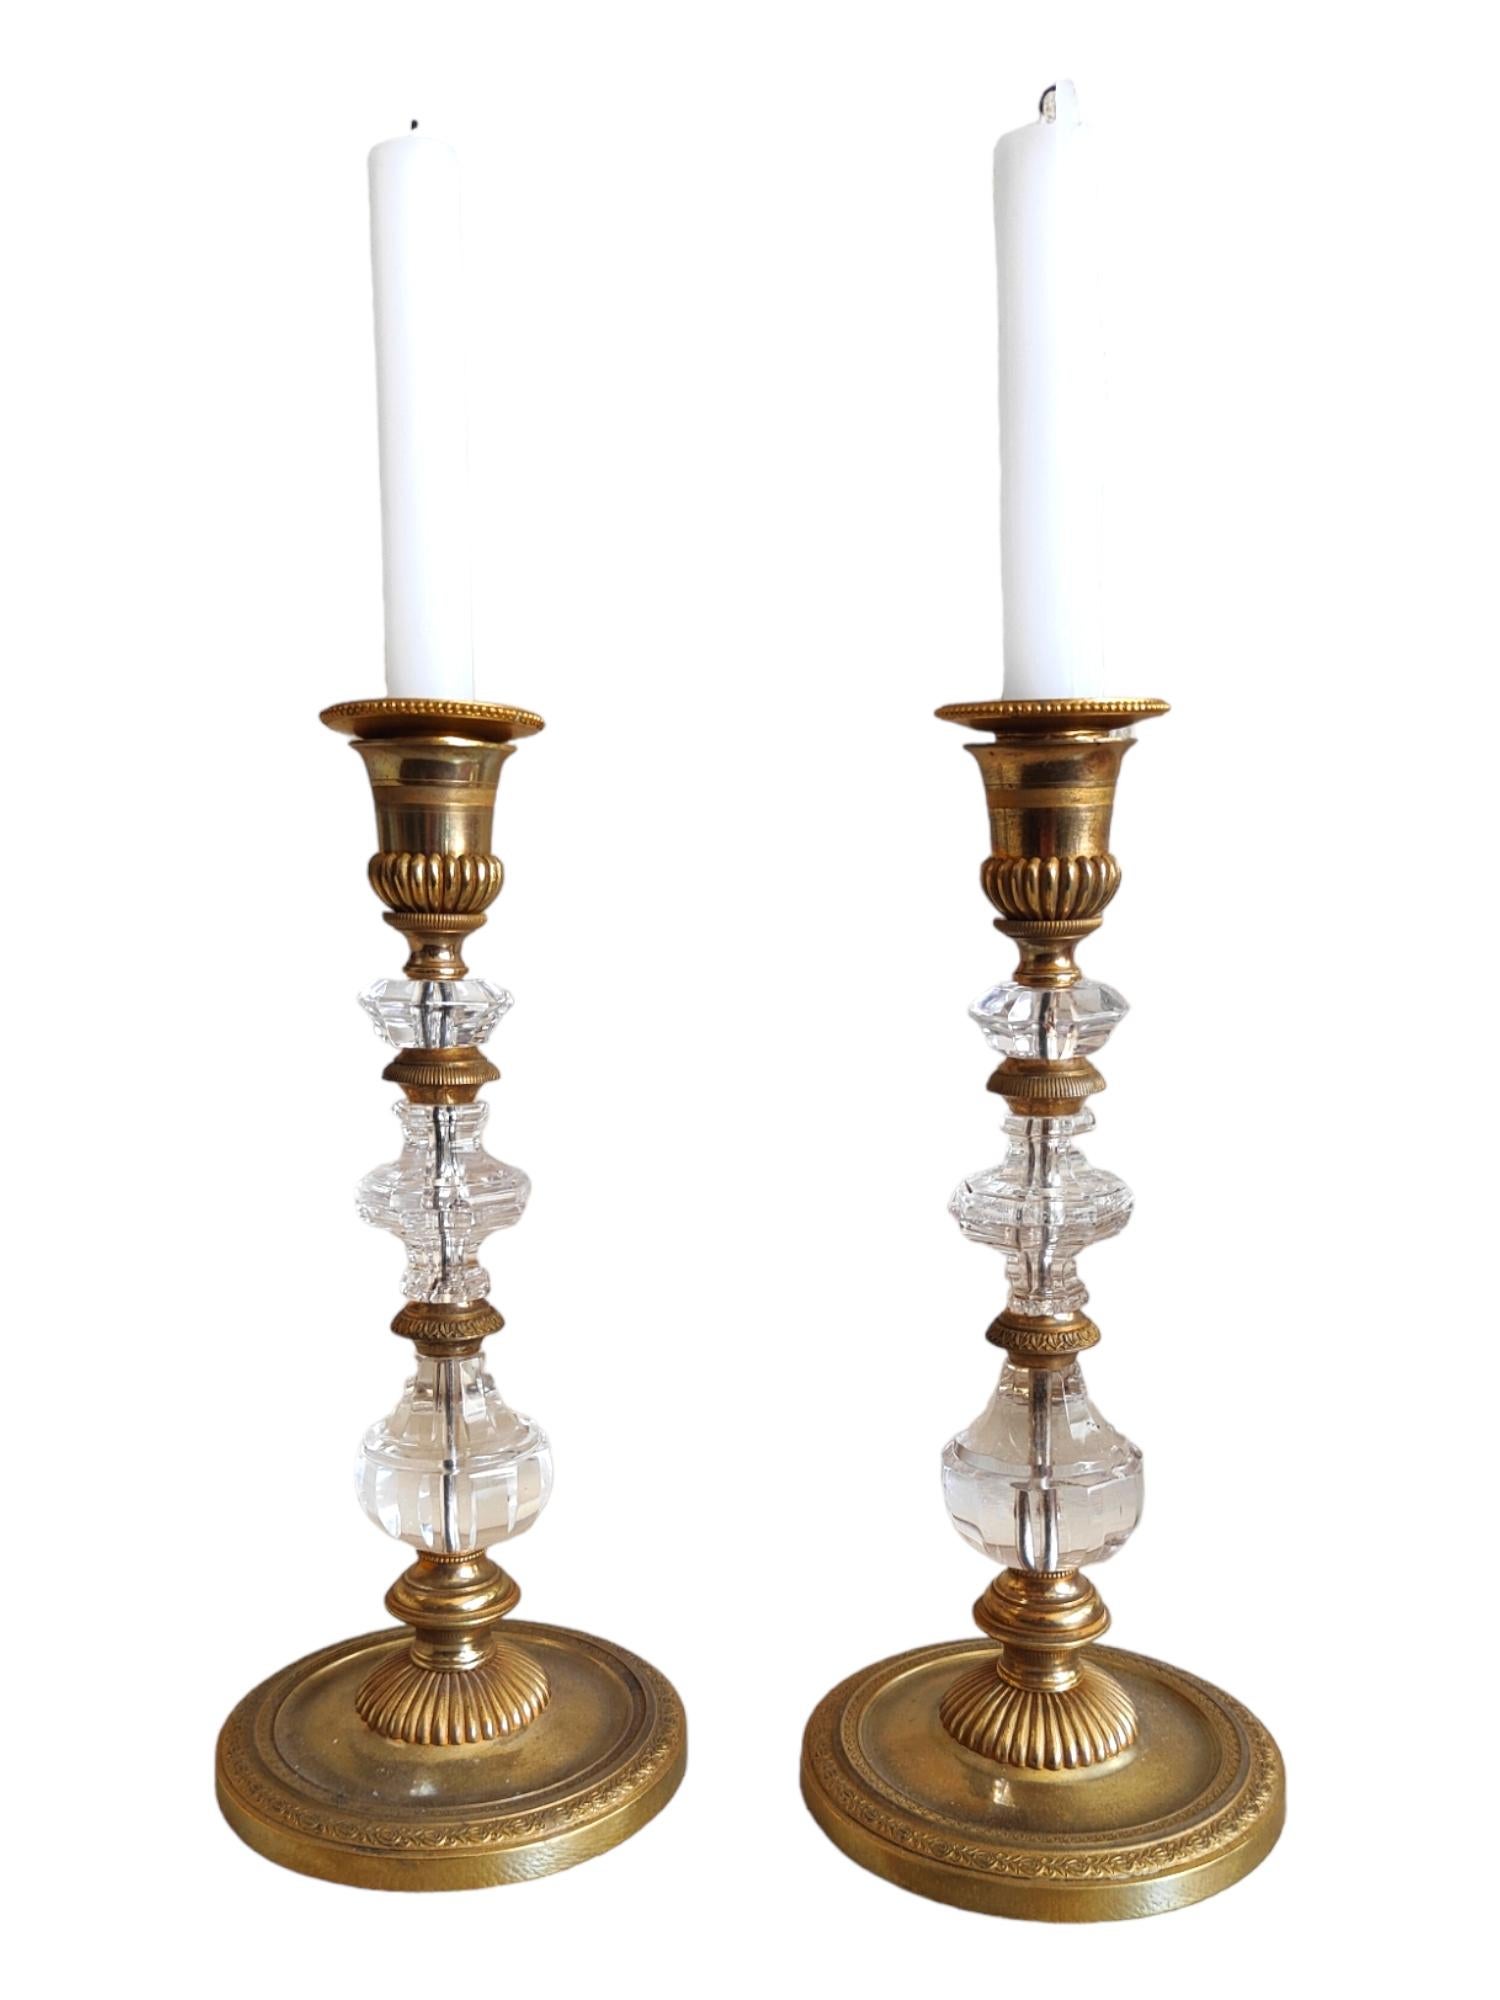 Pair of Quartz Candlesticks 'Rock Crystal, 19th Century' For Sale 7